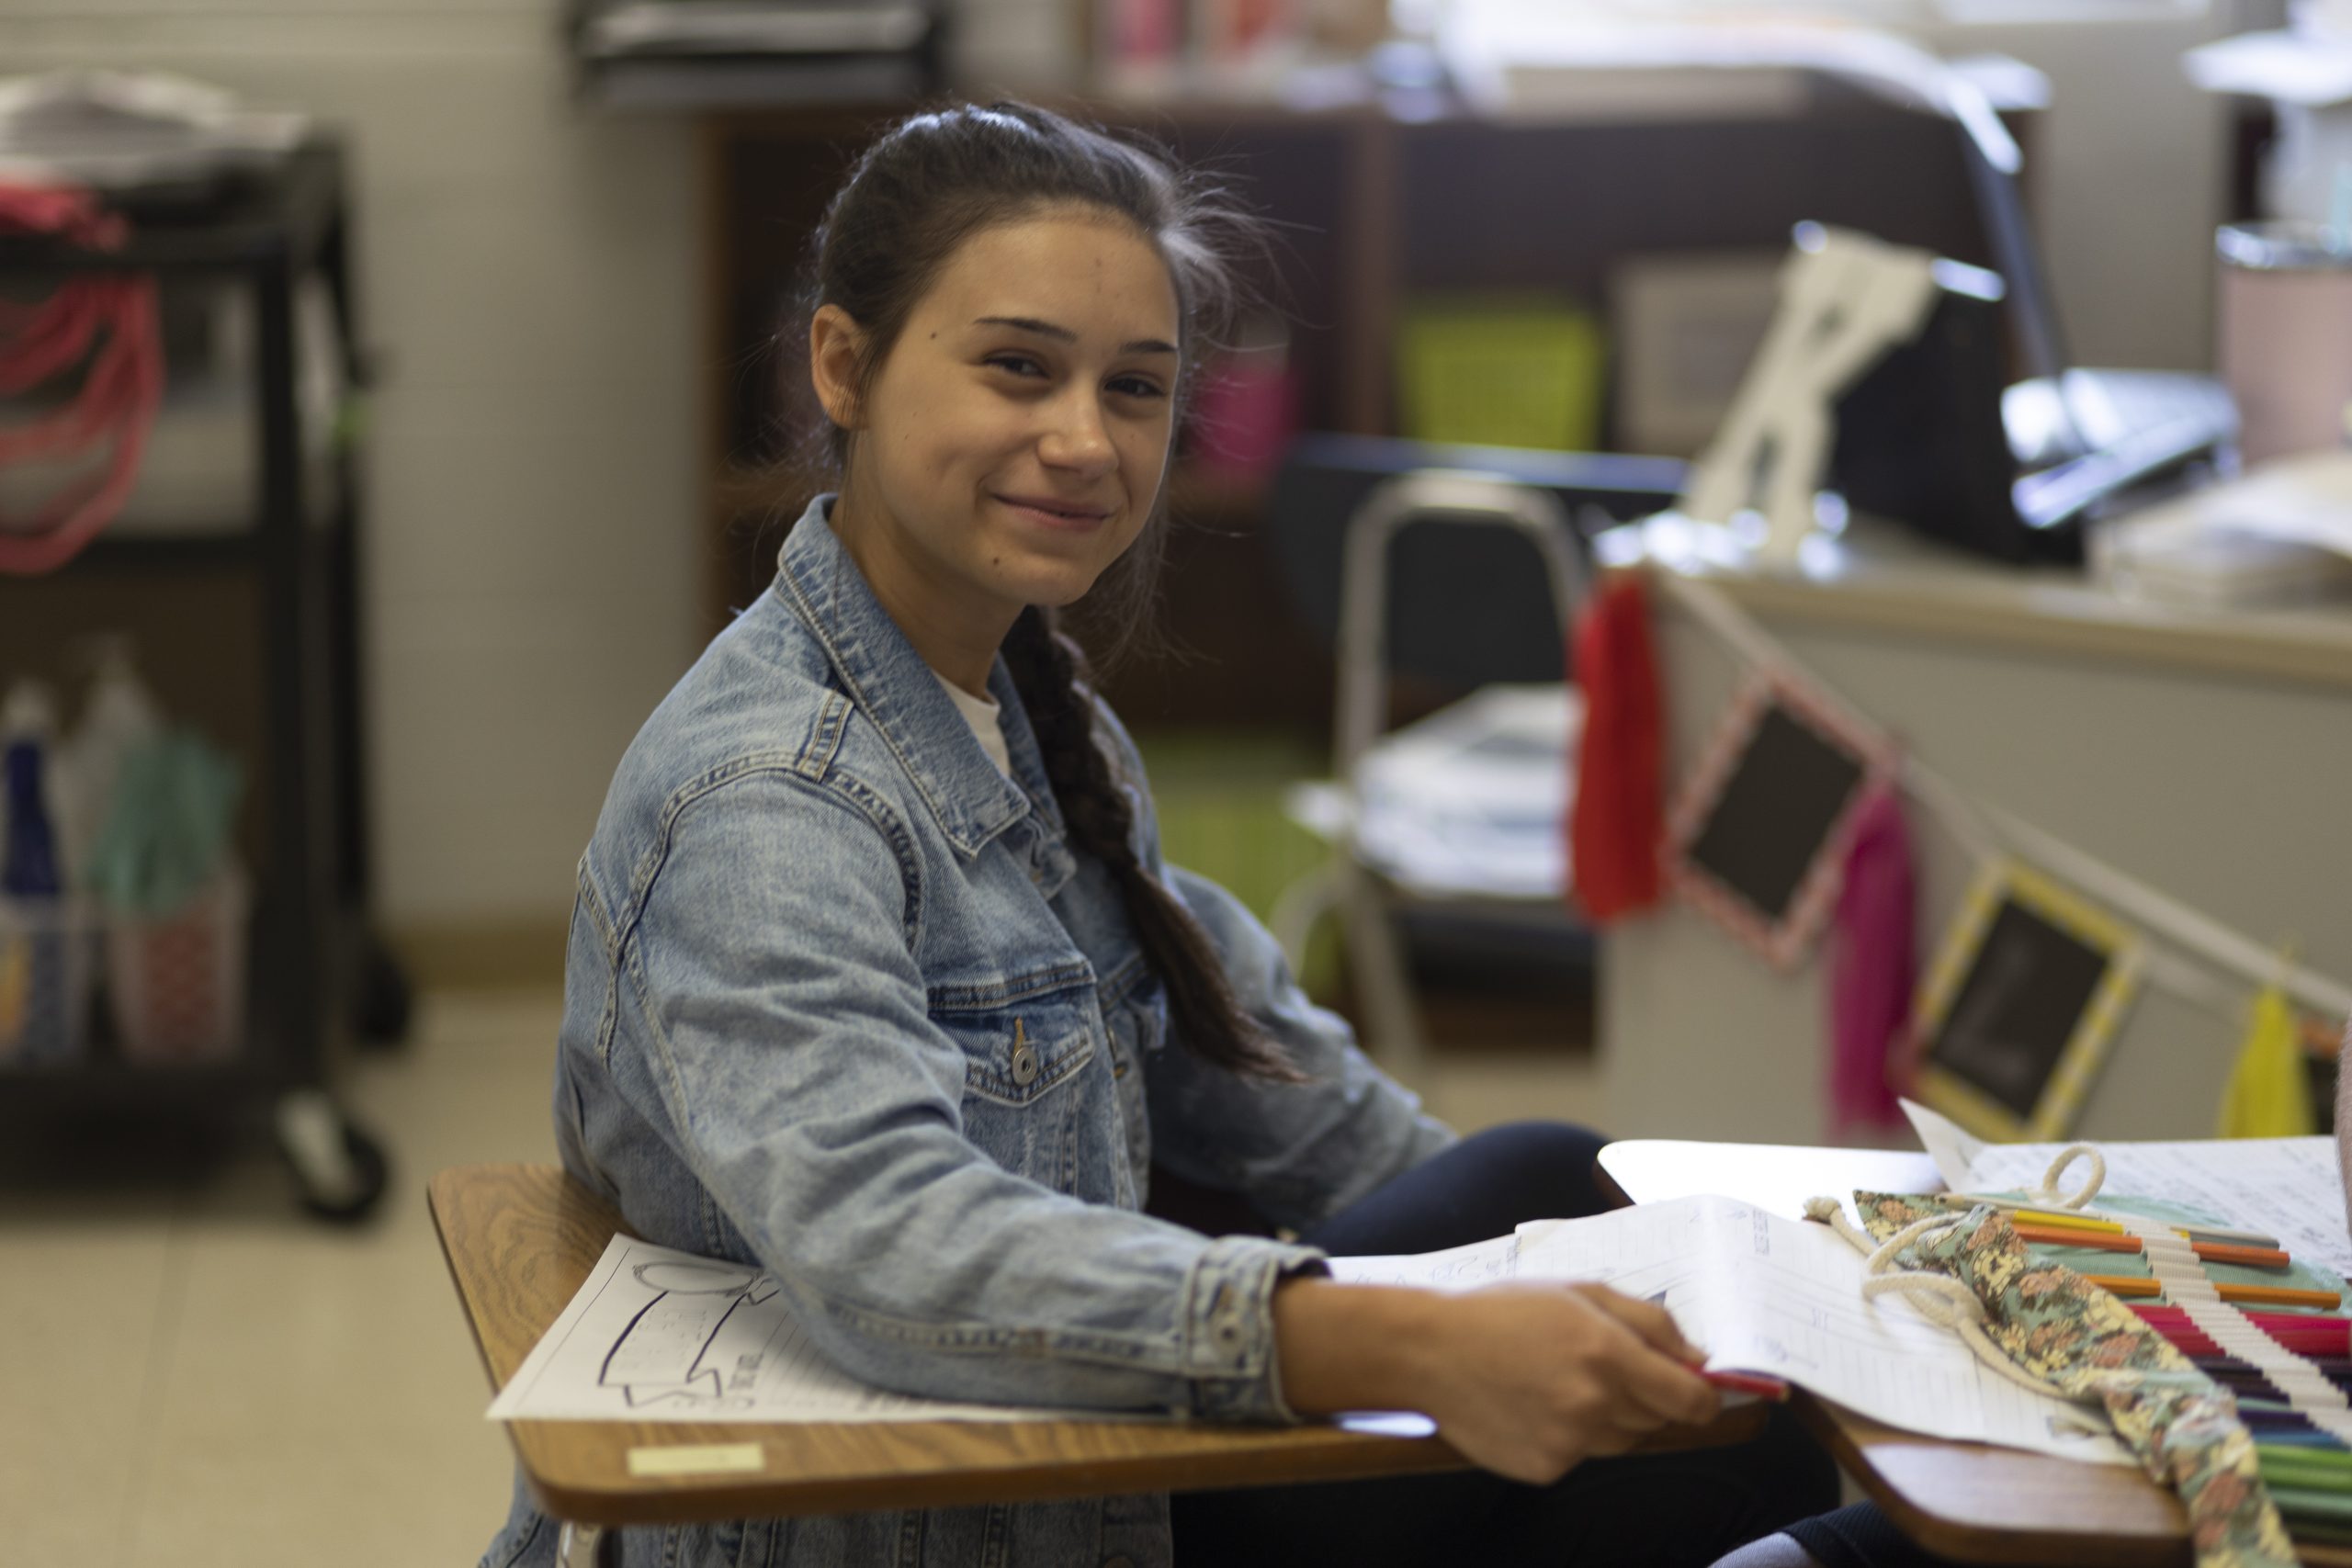 A smiling female student seated at desk.